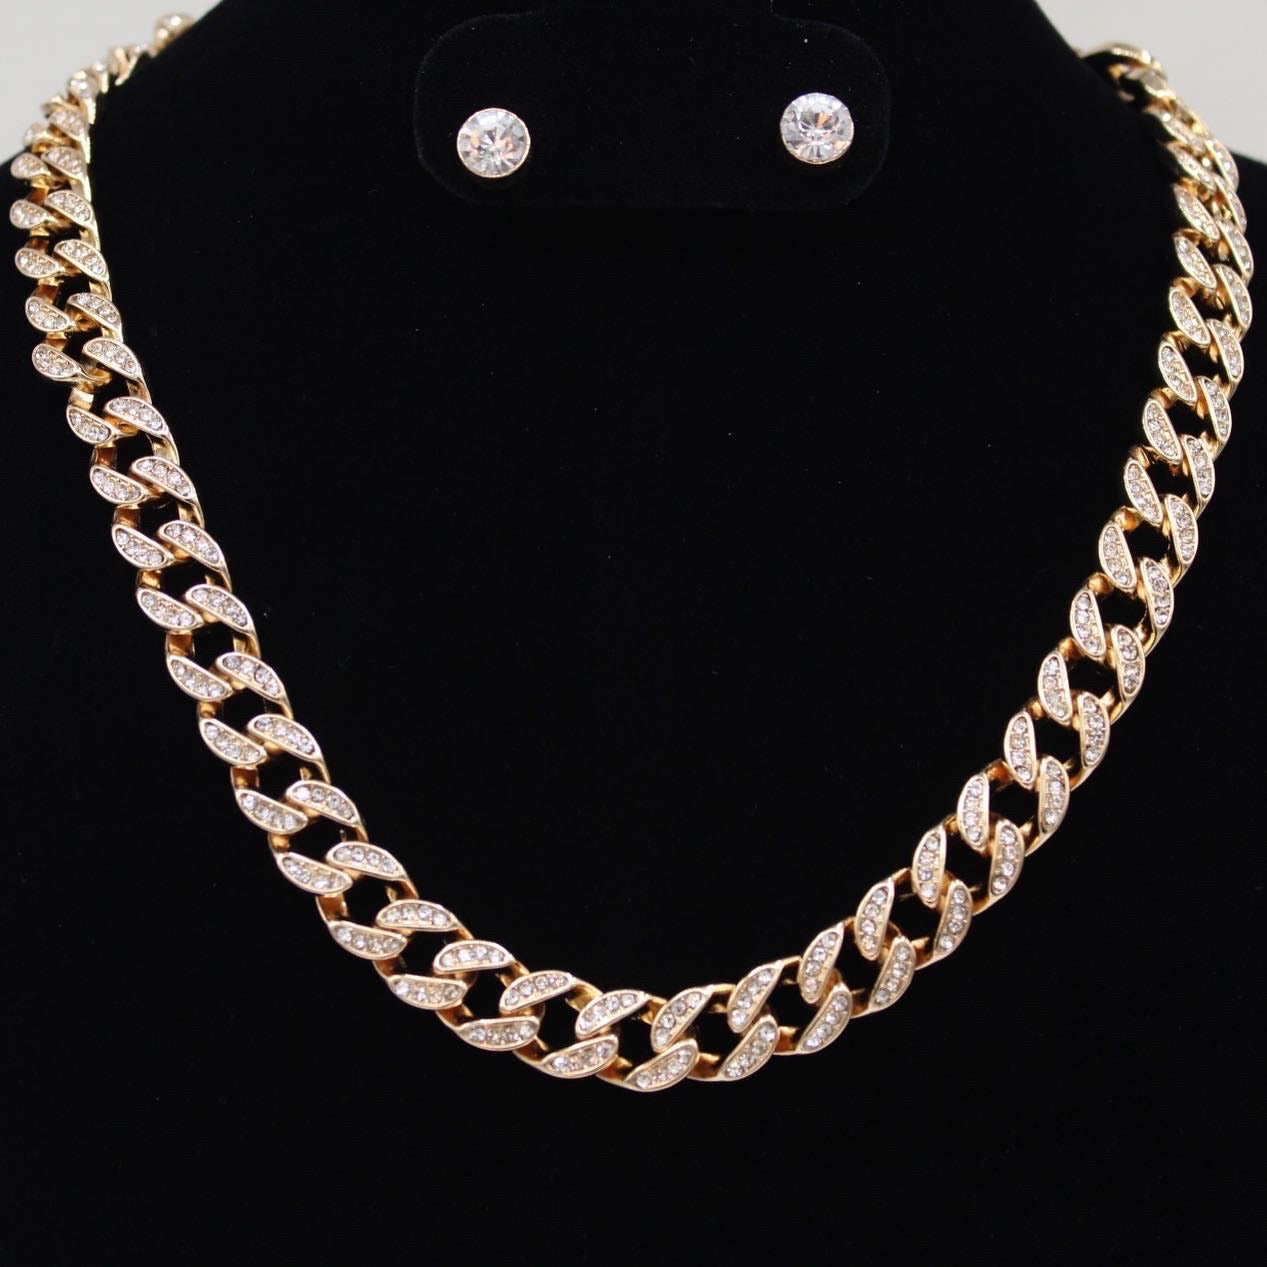 Chain Link Necklace with Stud earrings - Monique Fashion Accessories